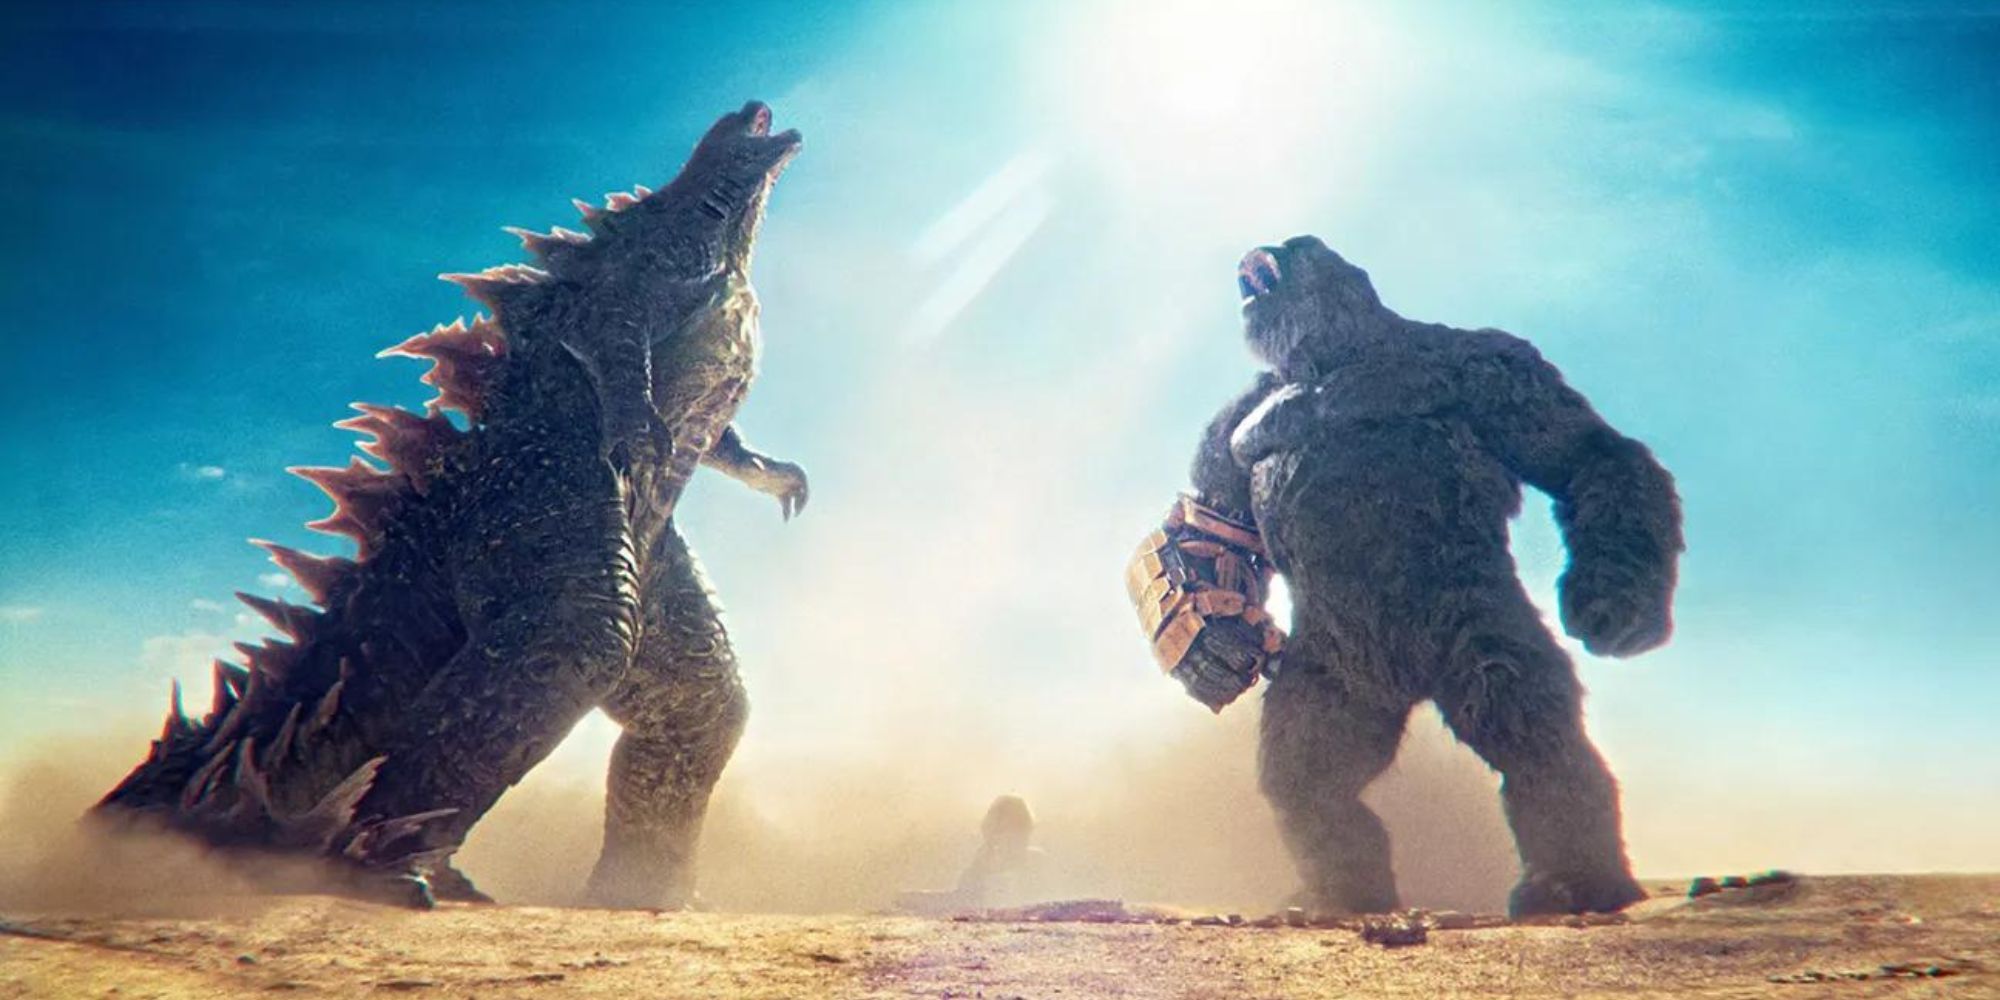 Godzilla and Kong roaring together in Egypt in Godzilla x Kong: The New Empire